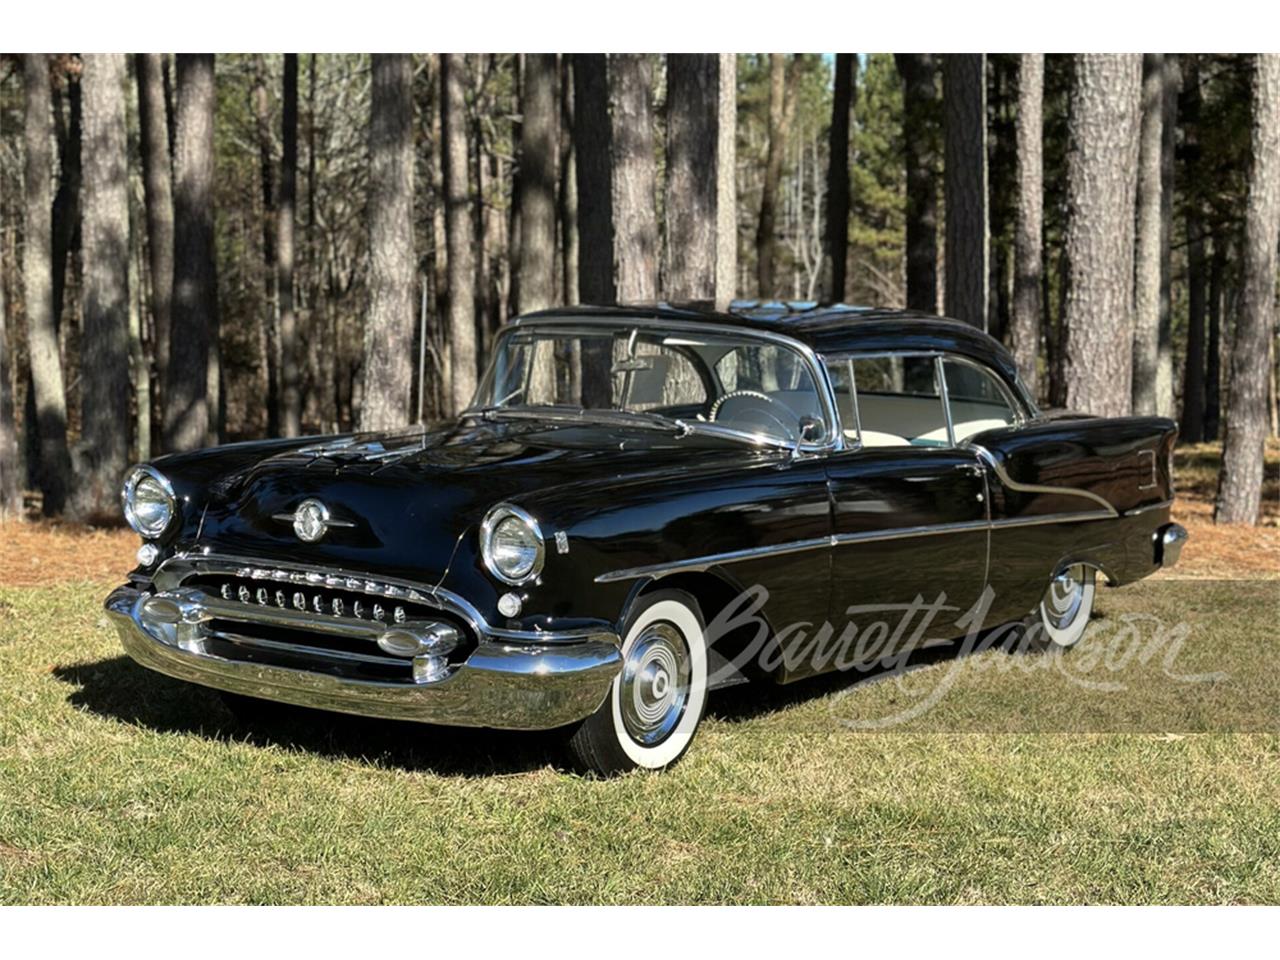 For Sale at Auction: 1955 Oldsmobile 88 in Scottsdale, Arizona for sale in Scottsdale, AZ